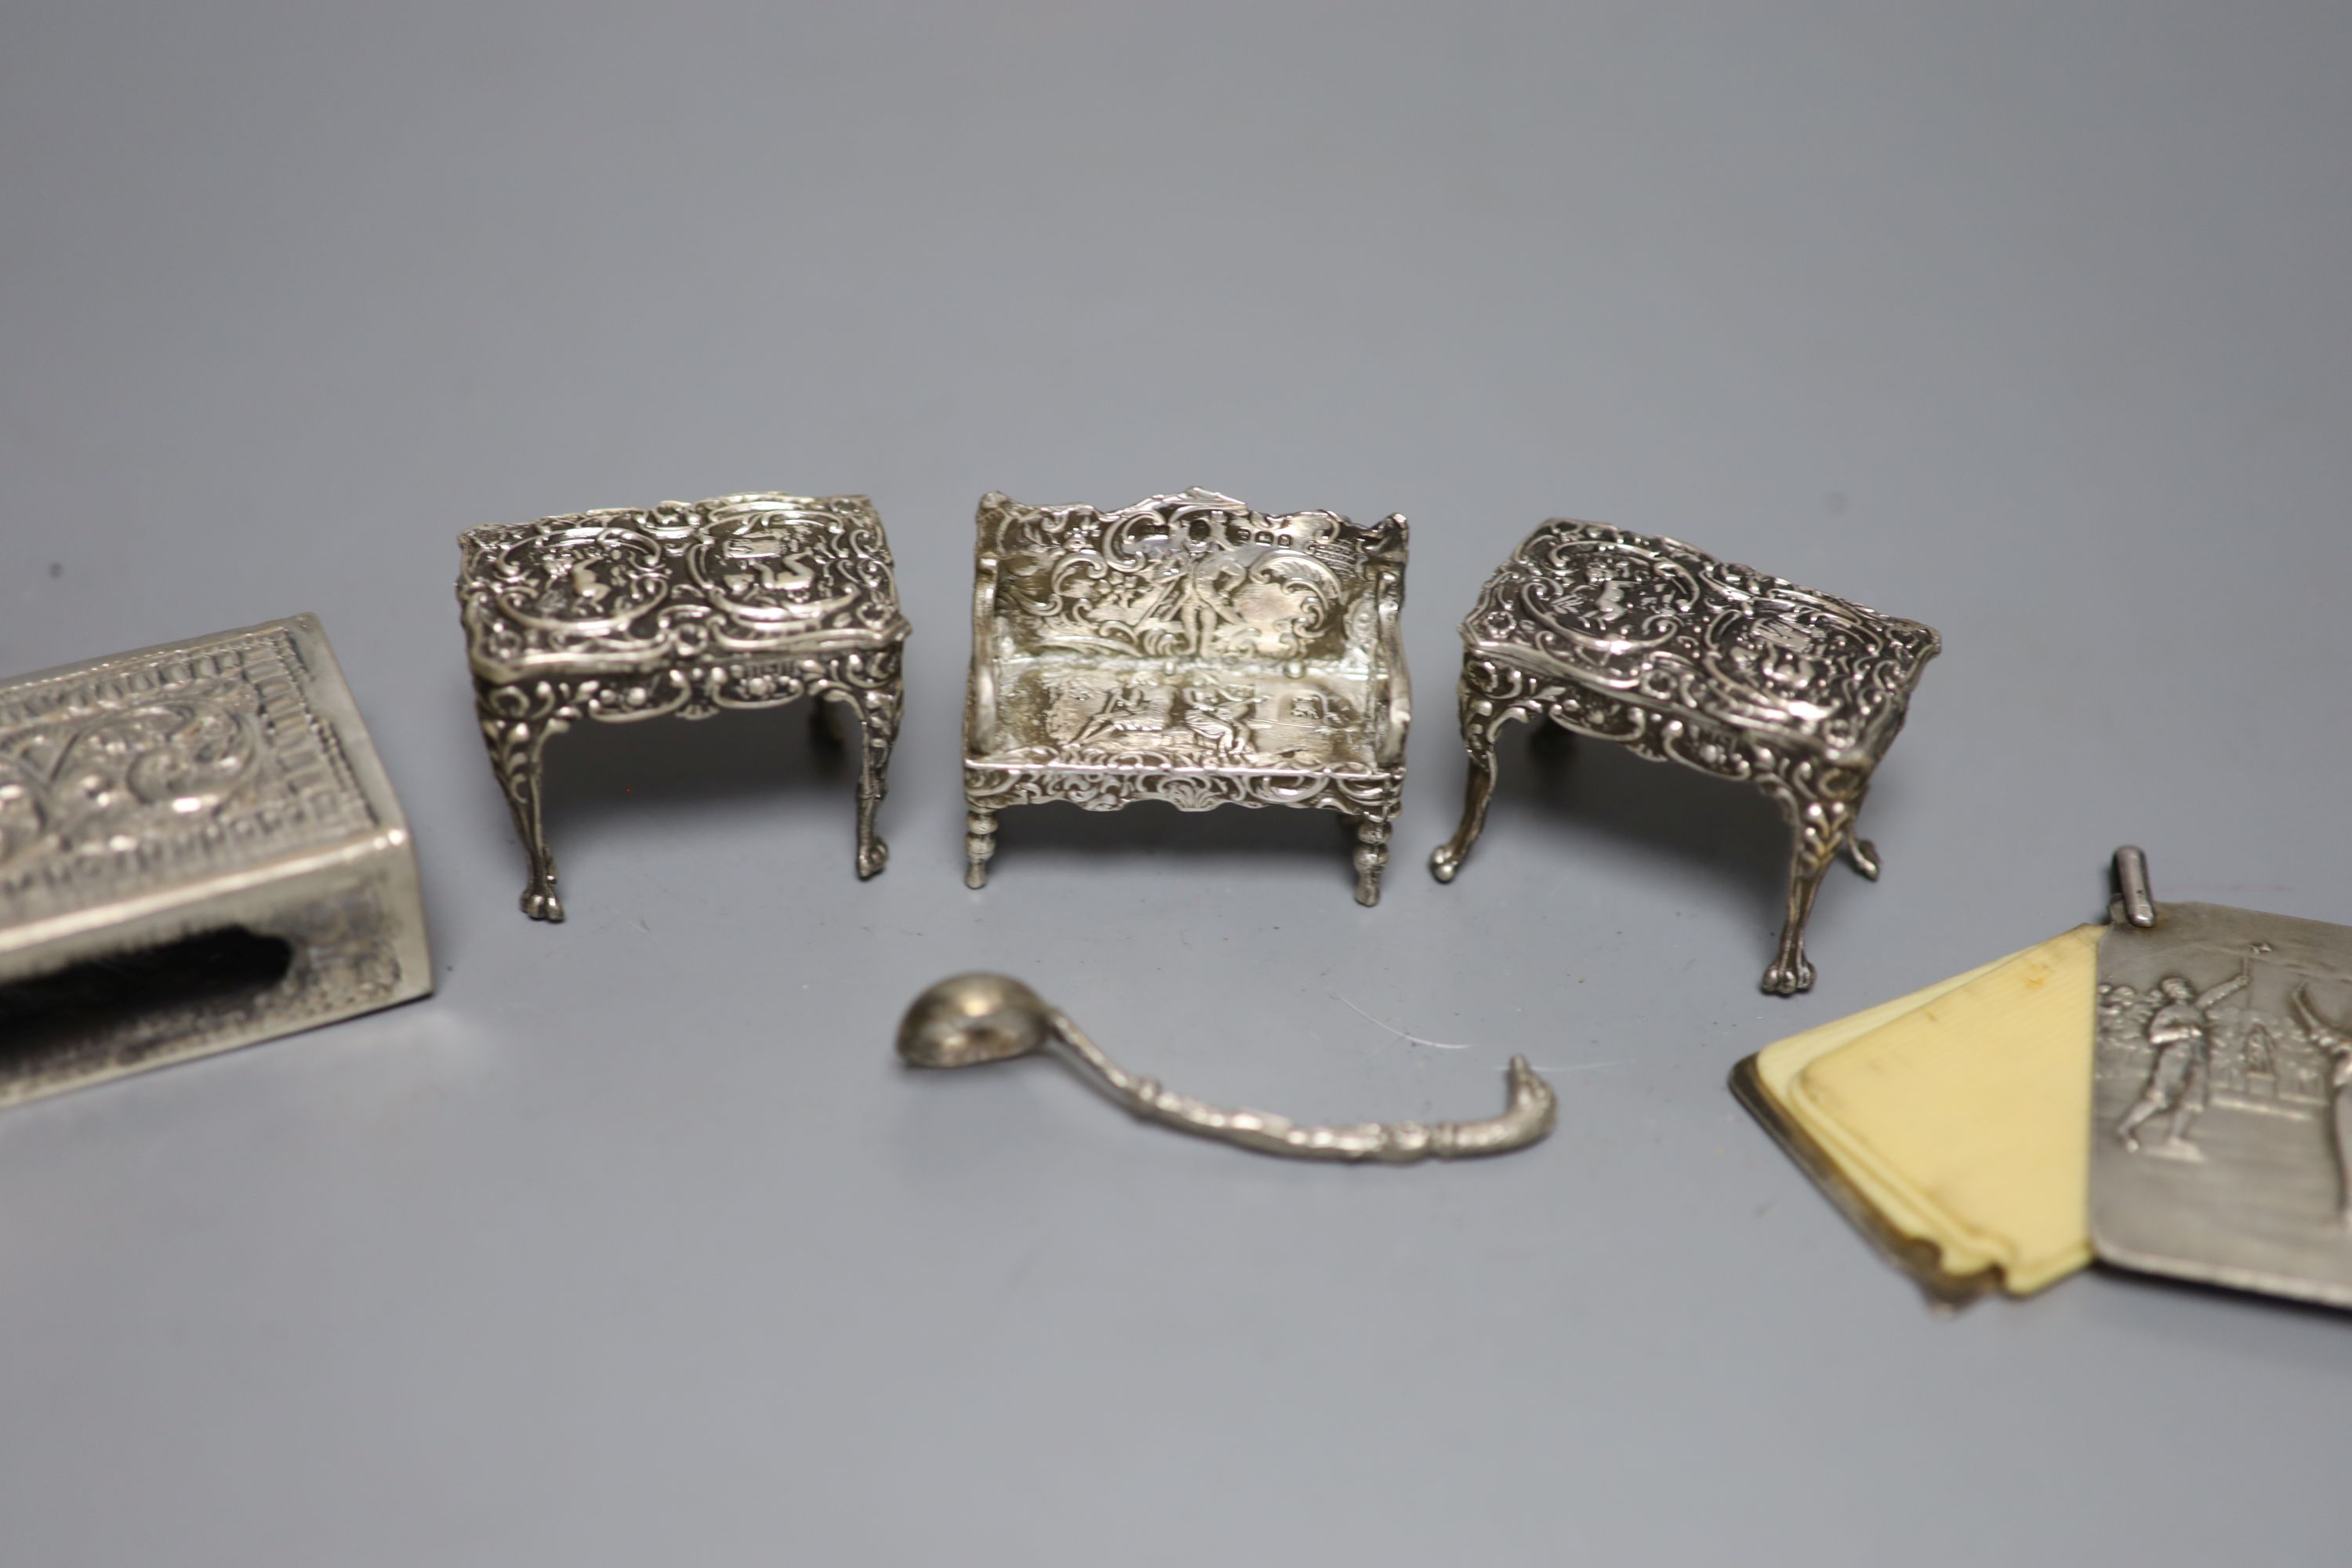 An Edwardian miniature silver model of a settee, two later chairs and a table and five other items, including aide memoire.